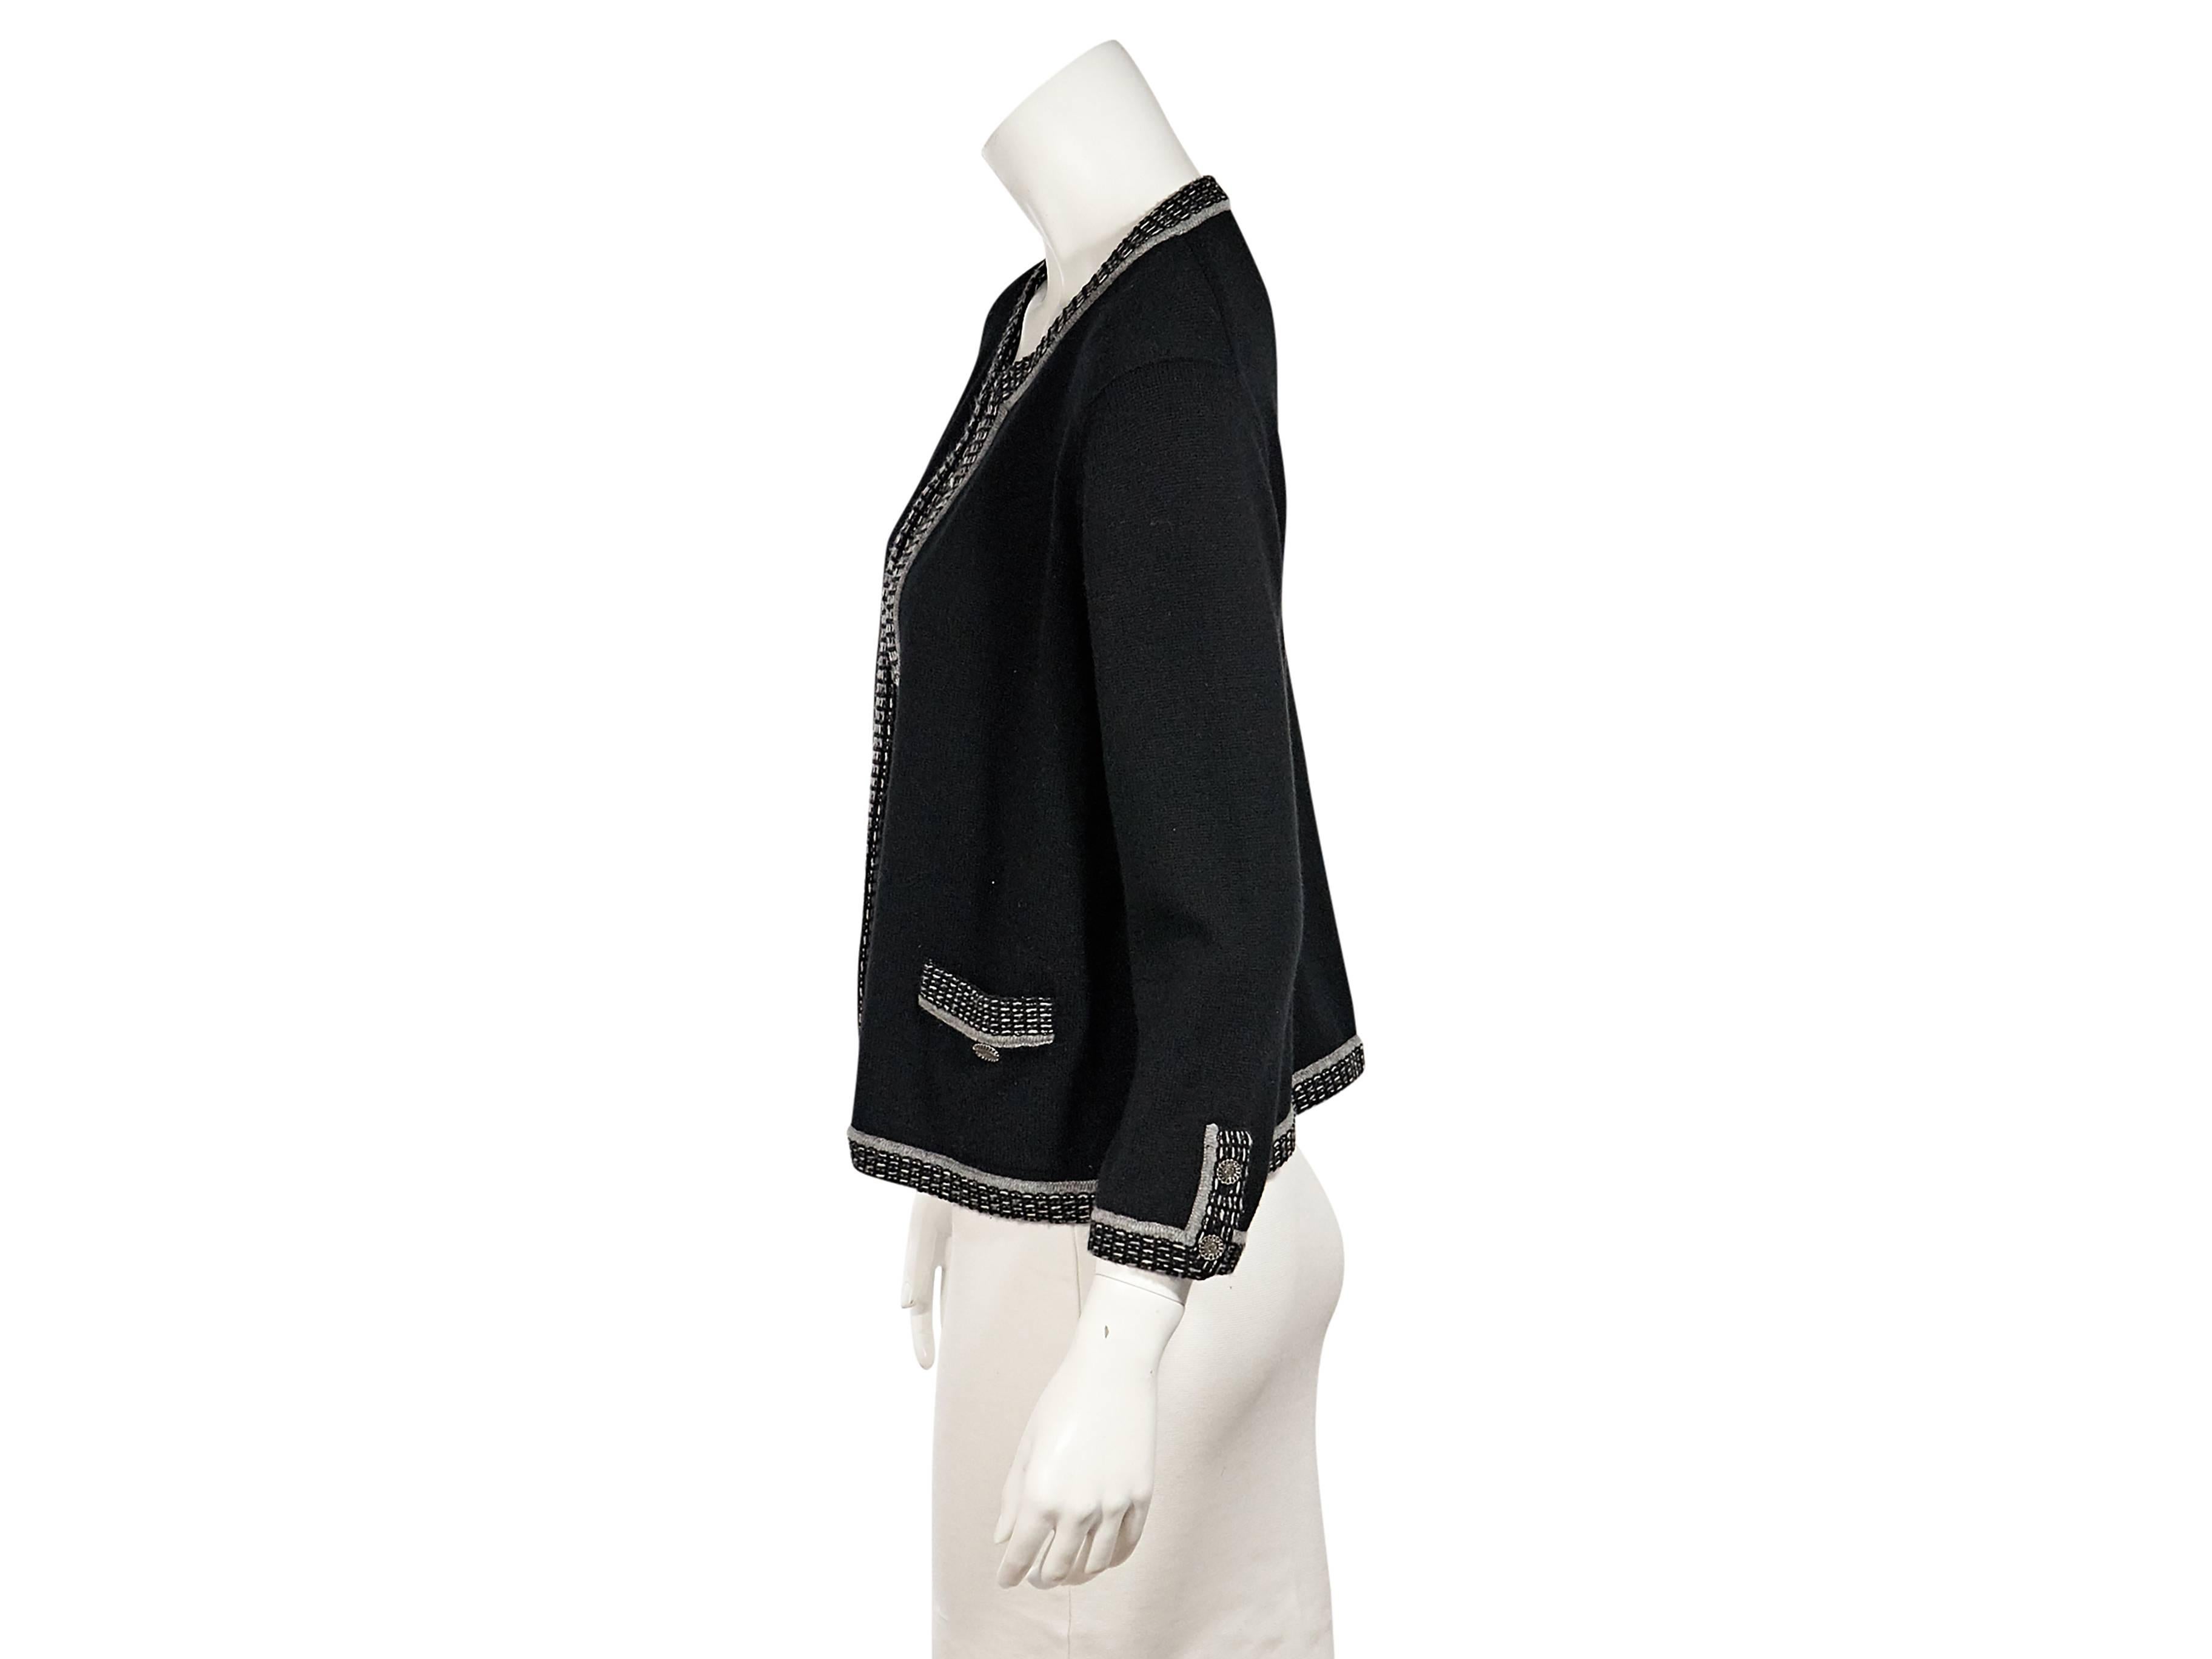 Product details:  Black cardigan with grey trim by Chanel.  Three-quarter length sleeves.  Open front.  Patch pockets at waist.  Label size FR 46. 
Condition: Very good. 
Est. Retail $ 1,248.00